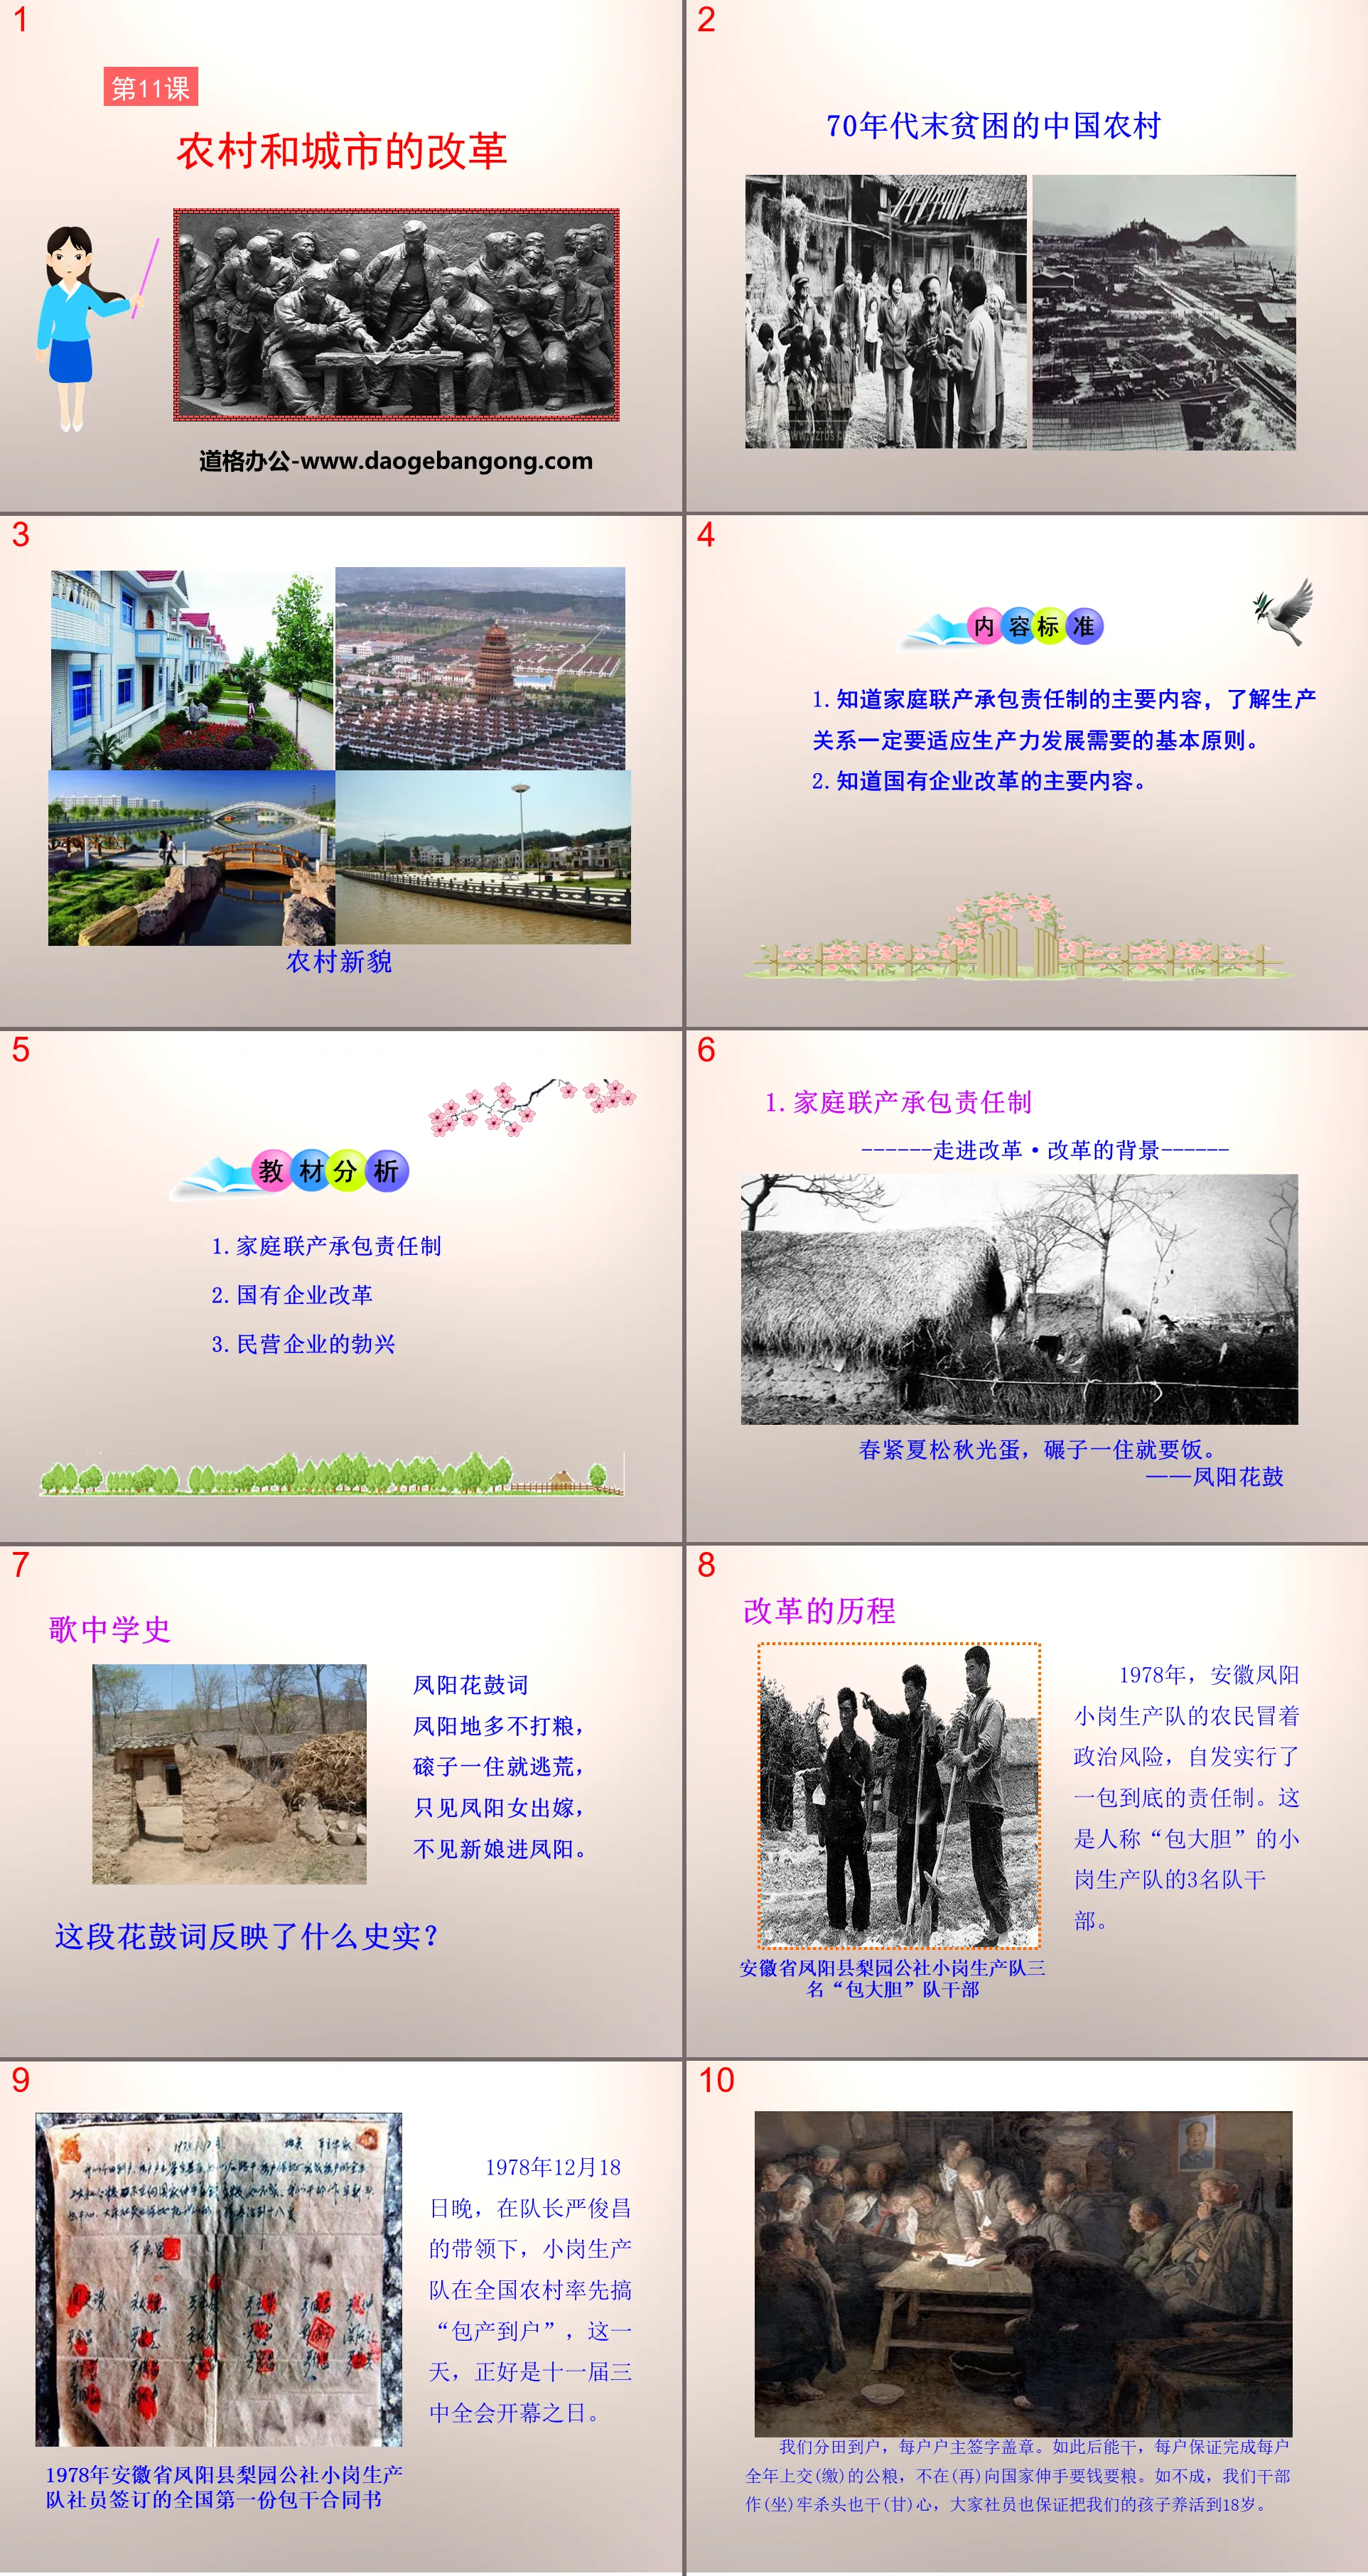 "Rural and Urban Reform" PPT courseware on building socialism with Chinese characteristics